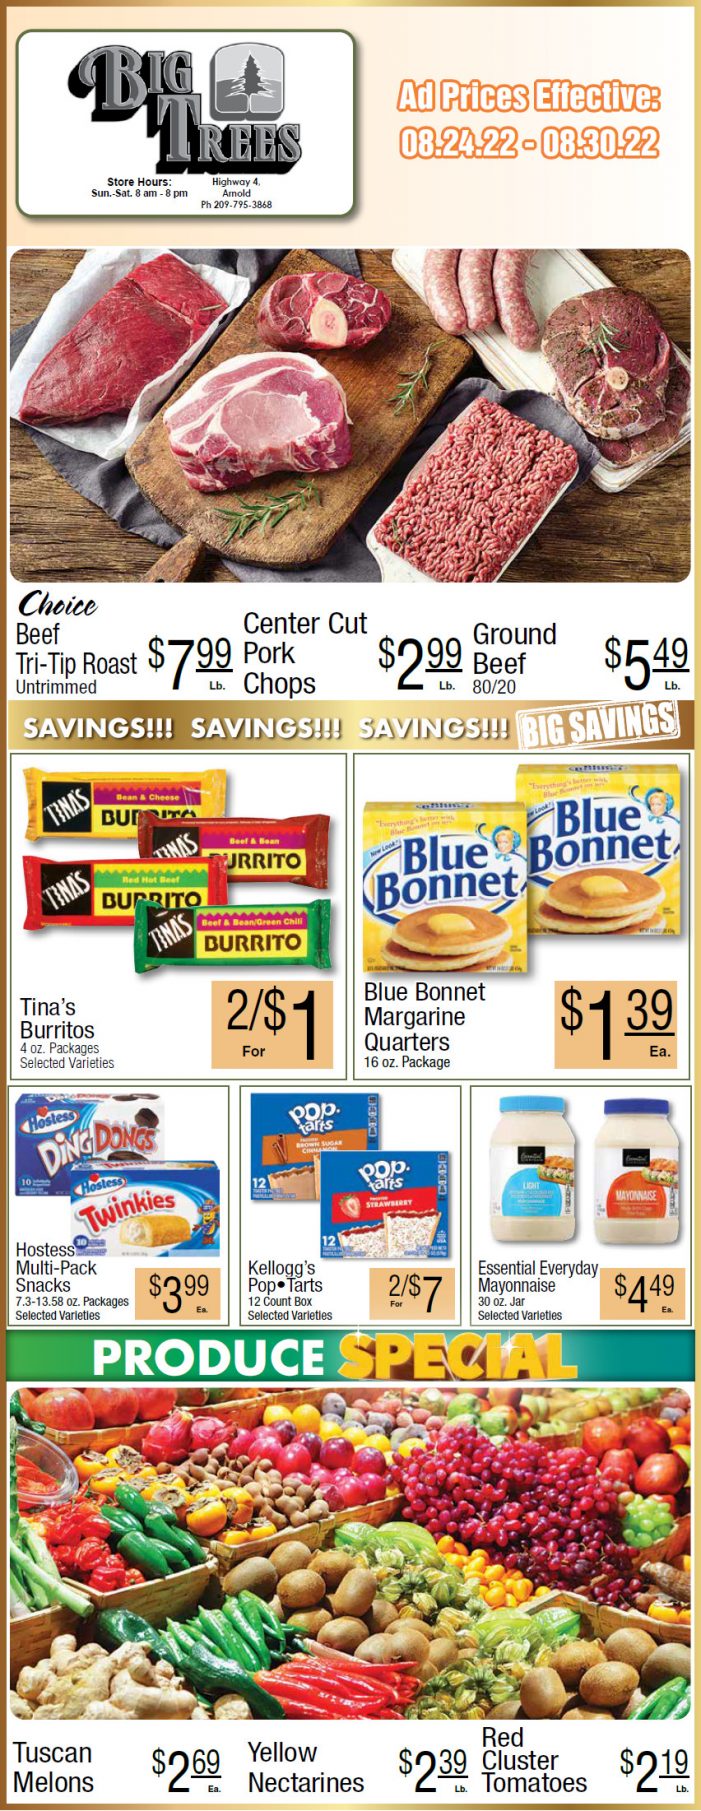 Big Trees Market Weekly Ad & Grocery Specials Through August 30th!  Shop Local & Save for Summer!!